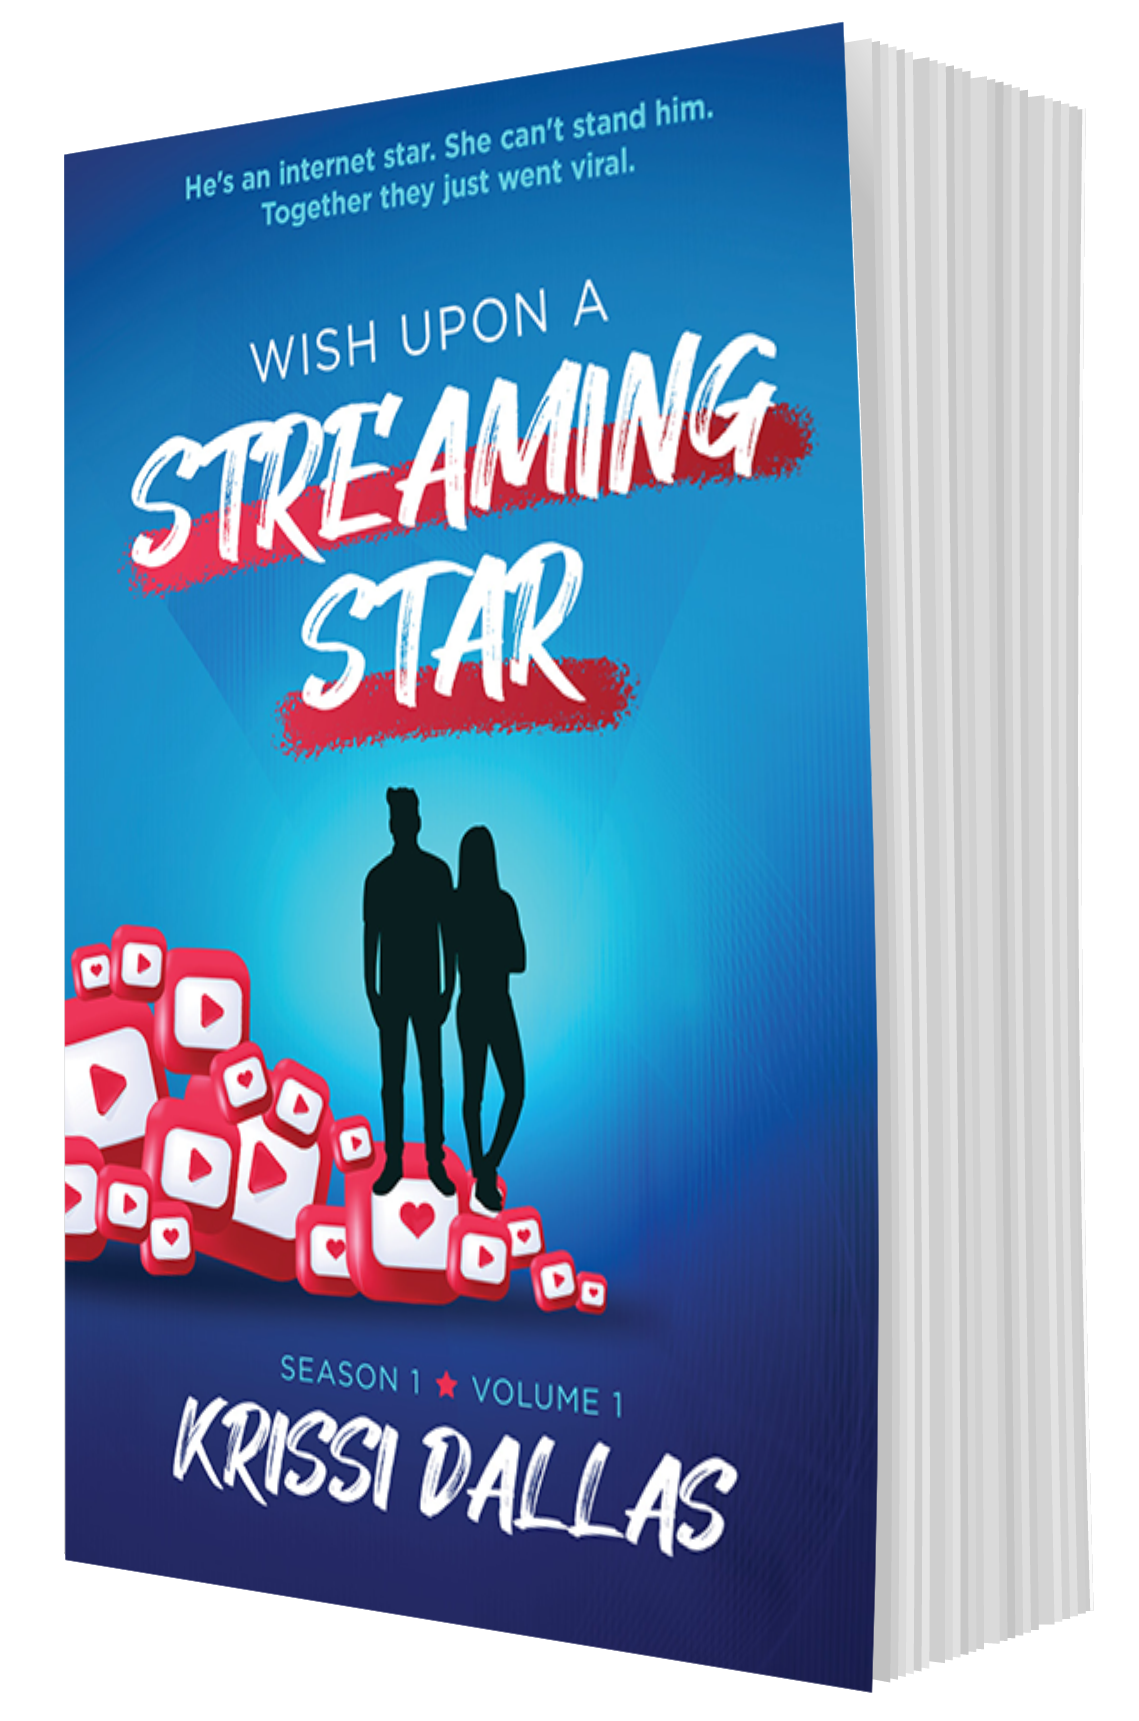 Wish Upon A Streaming Star Season 1 Volume 1 - Special Edition Paperback